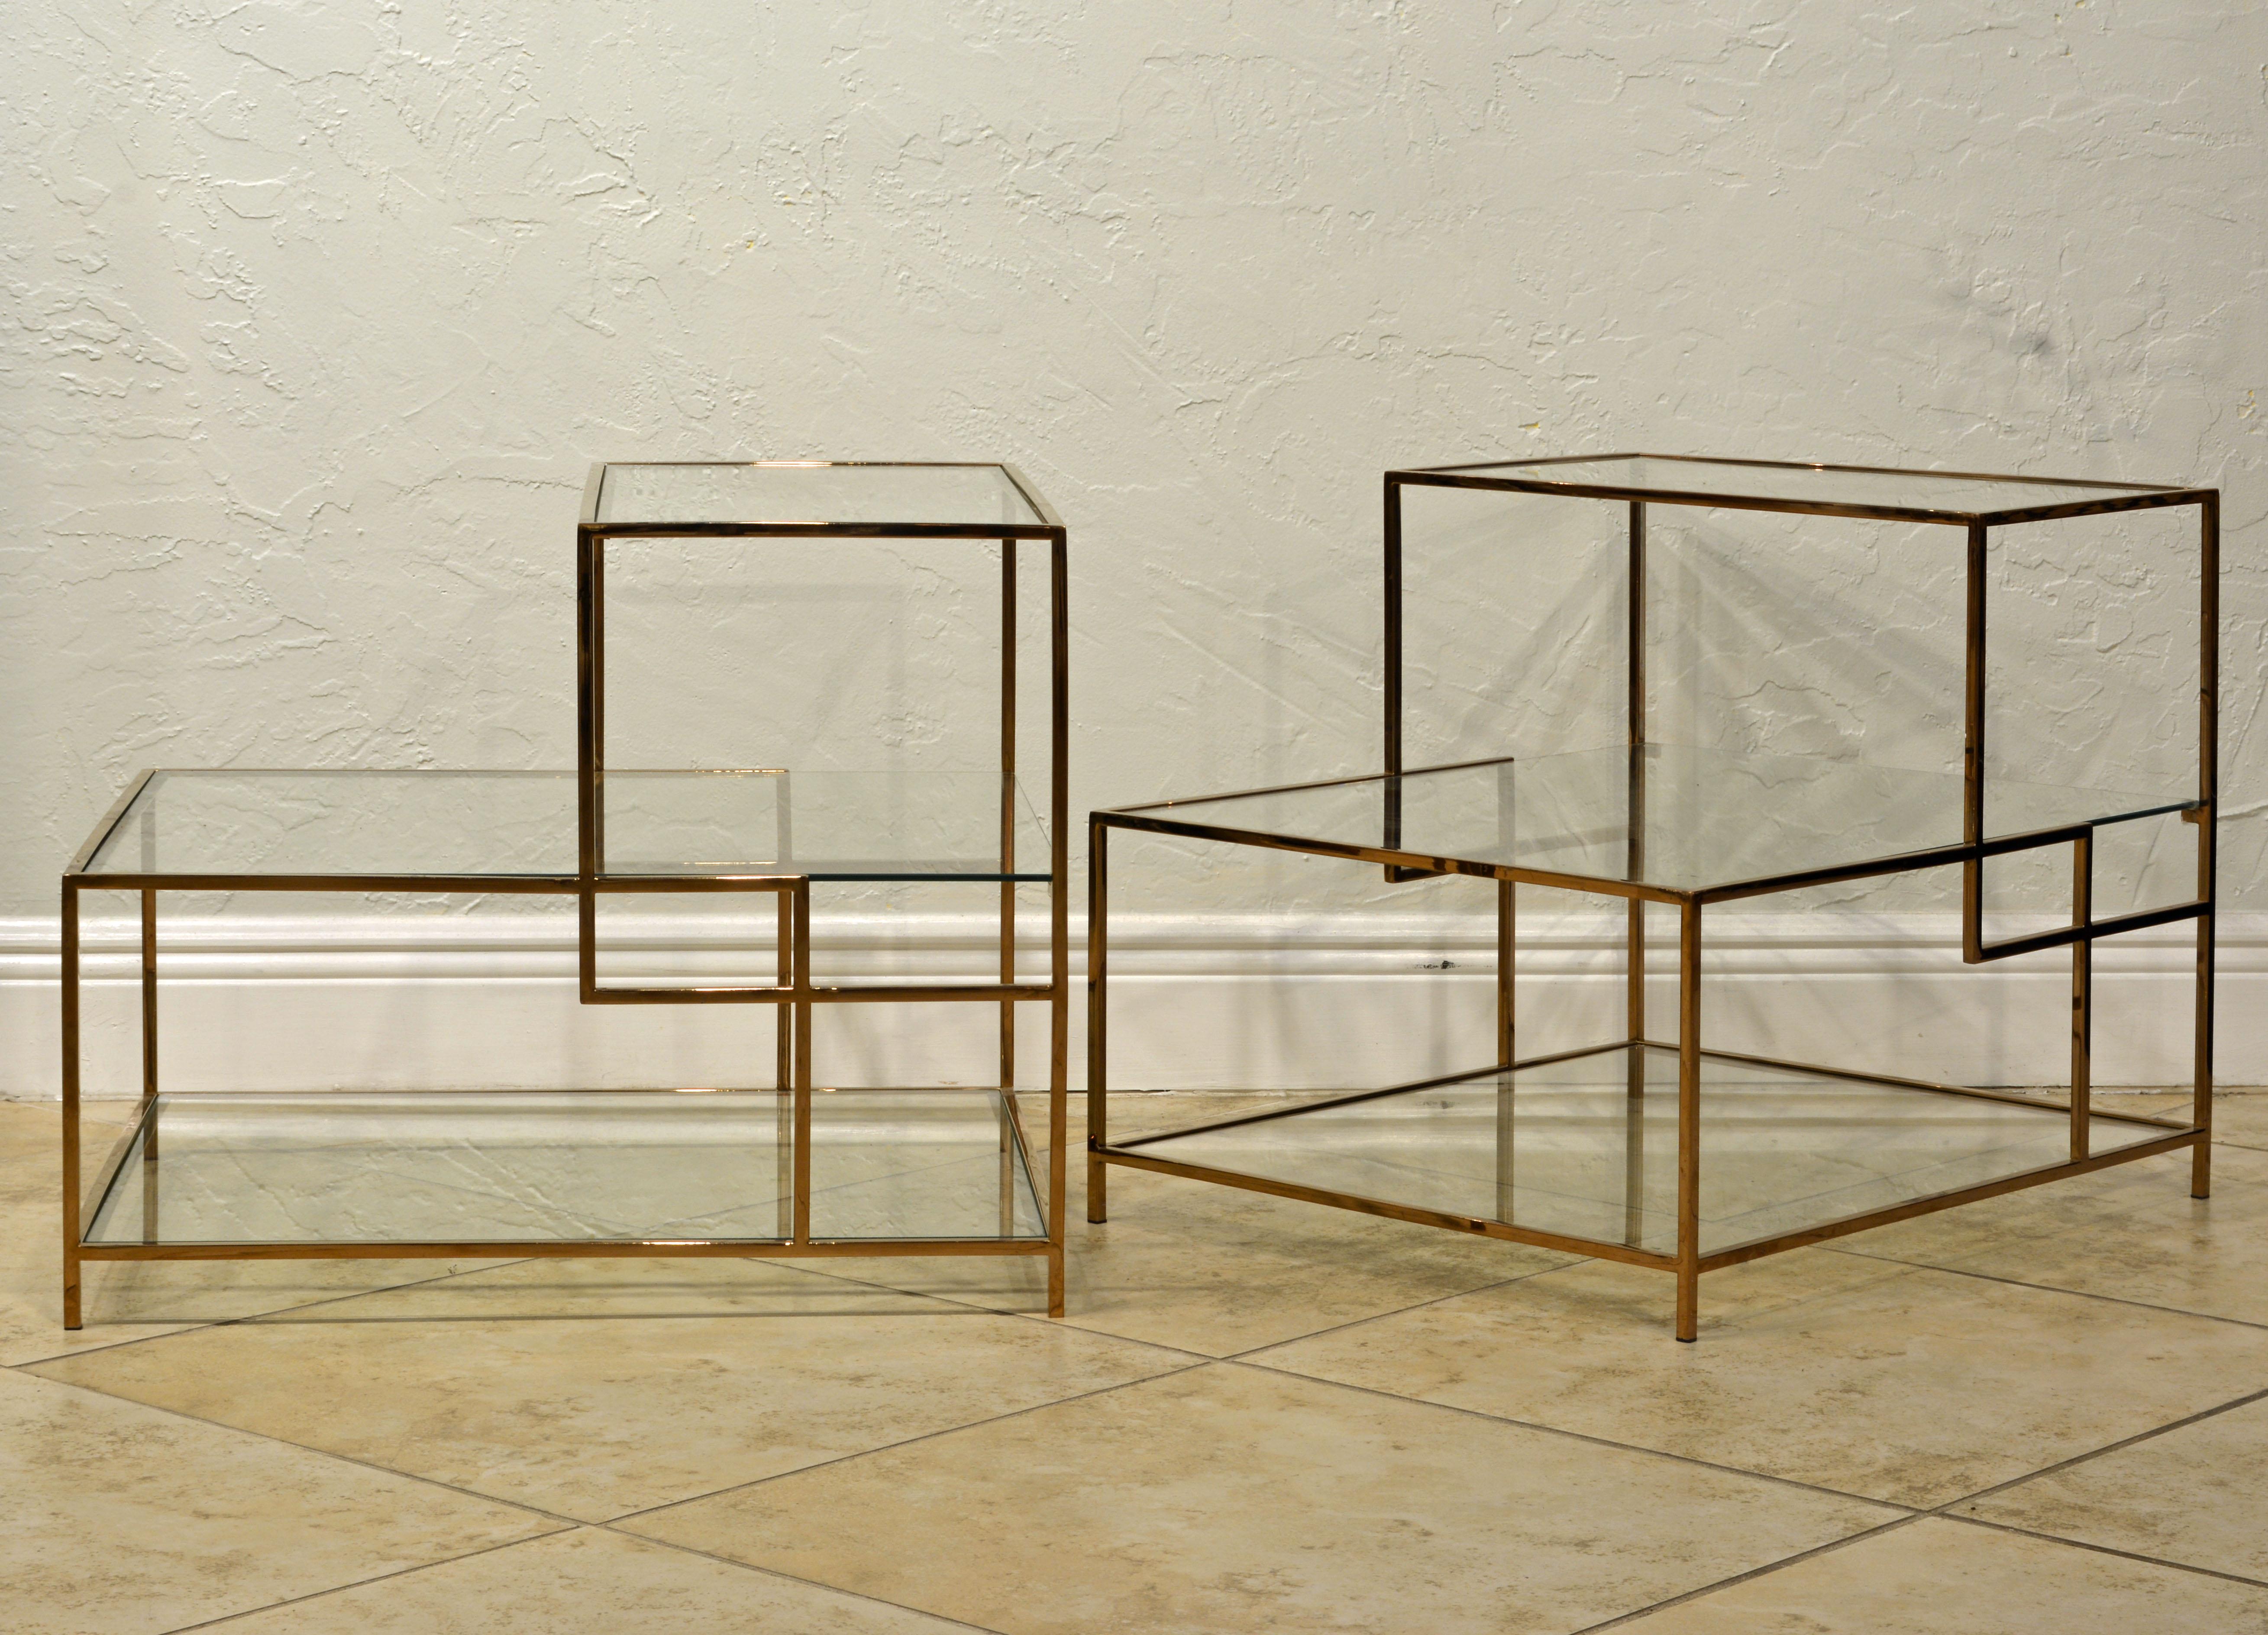 These end tables feature an elegant Minimalist design reminiscent of Piet Mondrian's art. The frames are made of solid brass with beautiful sleek craftsmanship. The three glass surface tiers offer great options for placement of lamps, magazines and